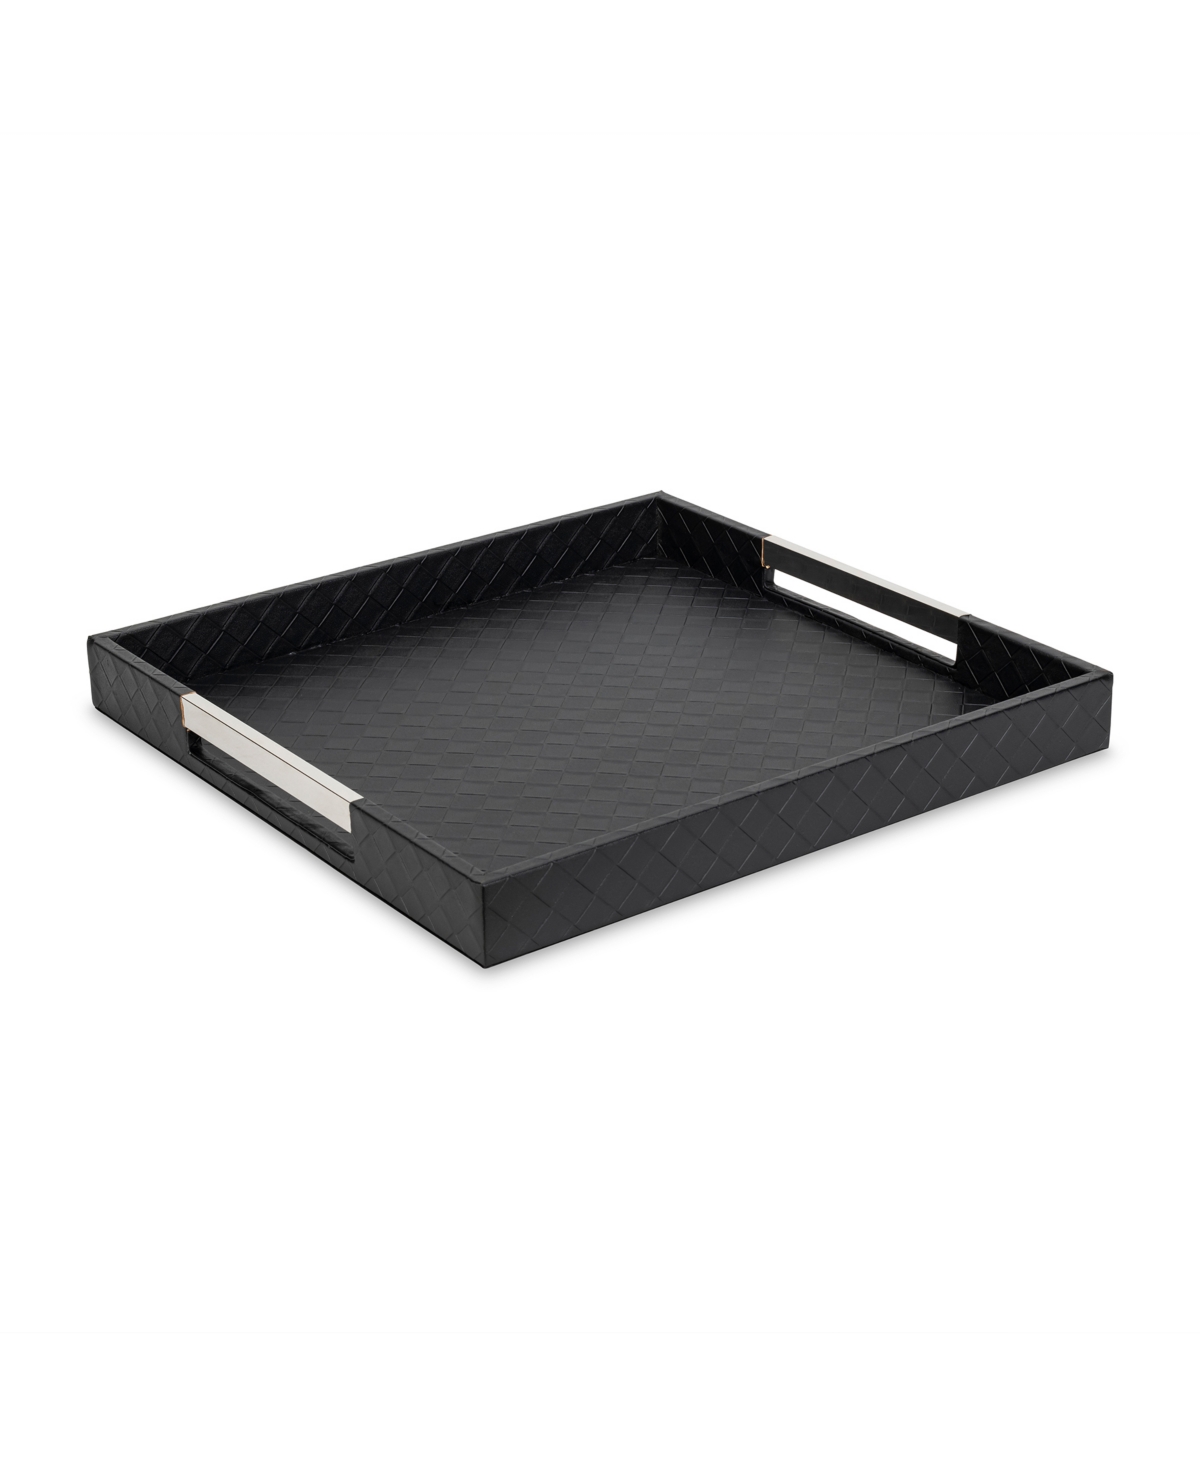 American Atelier Black Tray With Silver-tone Handles Tray